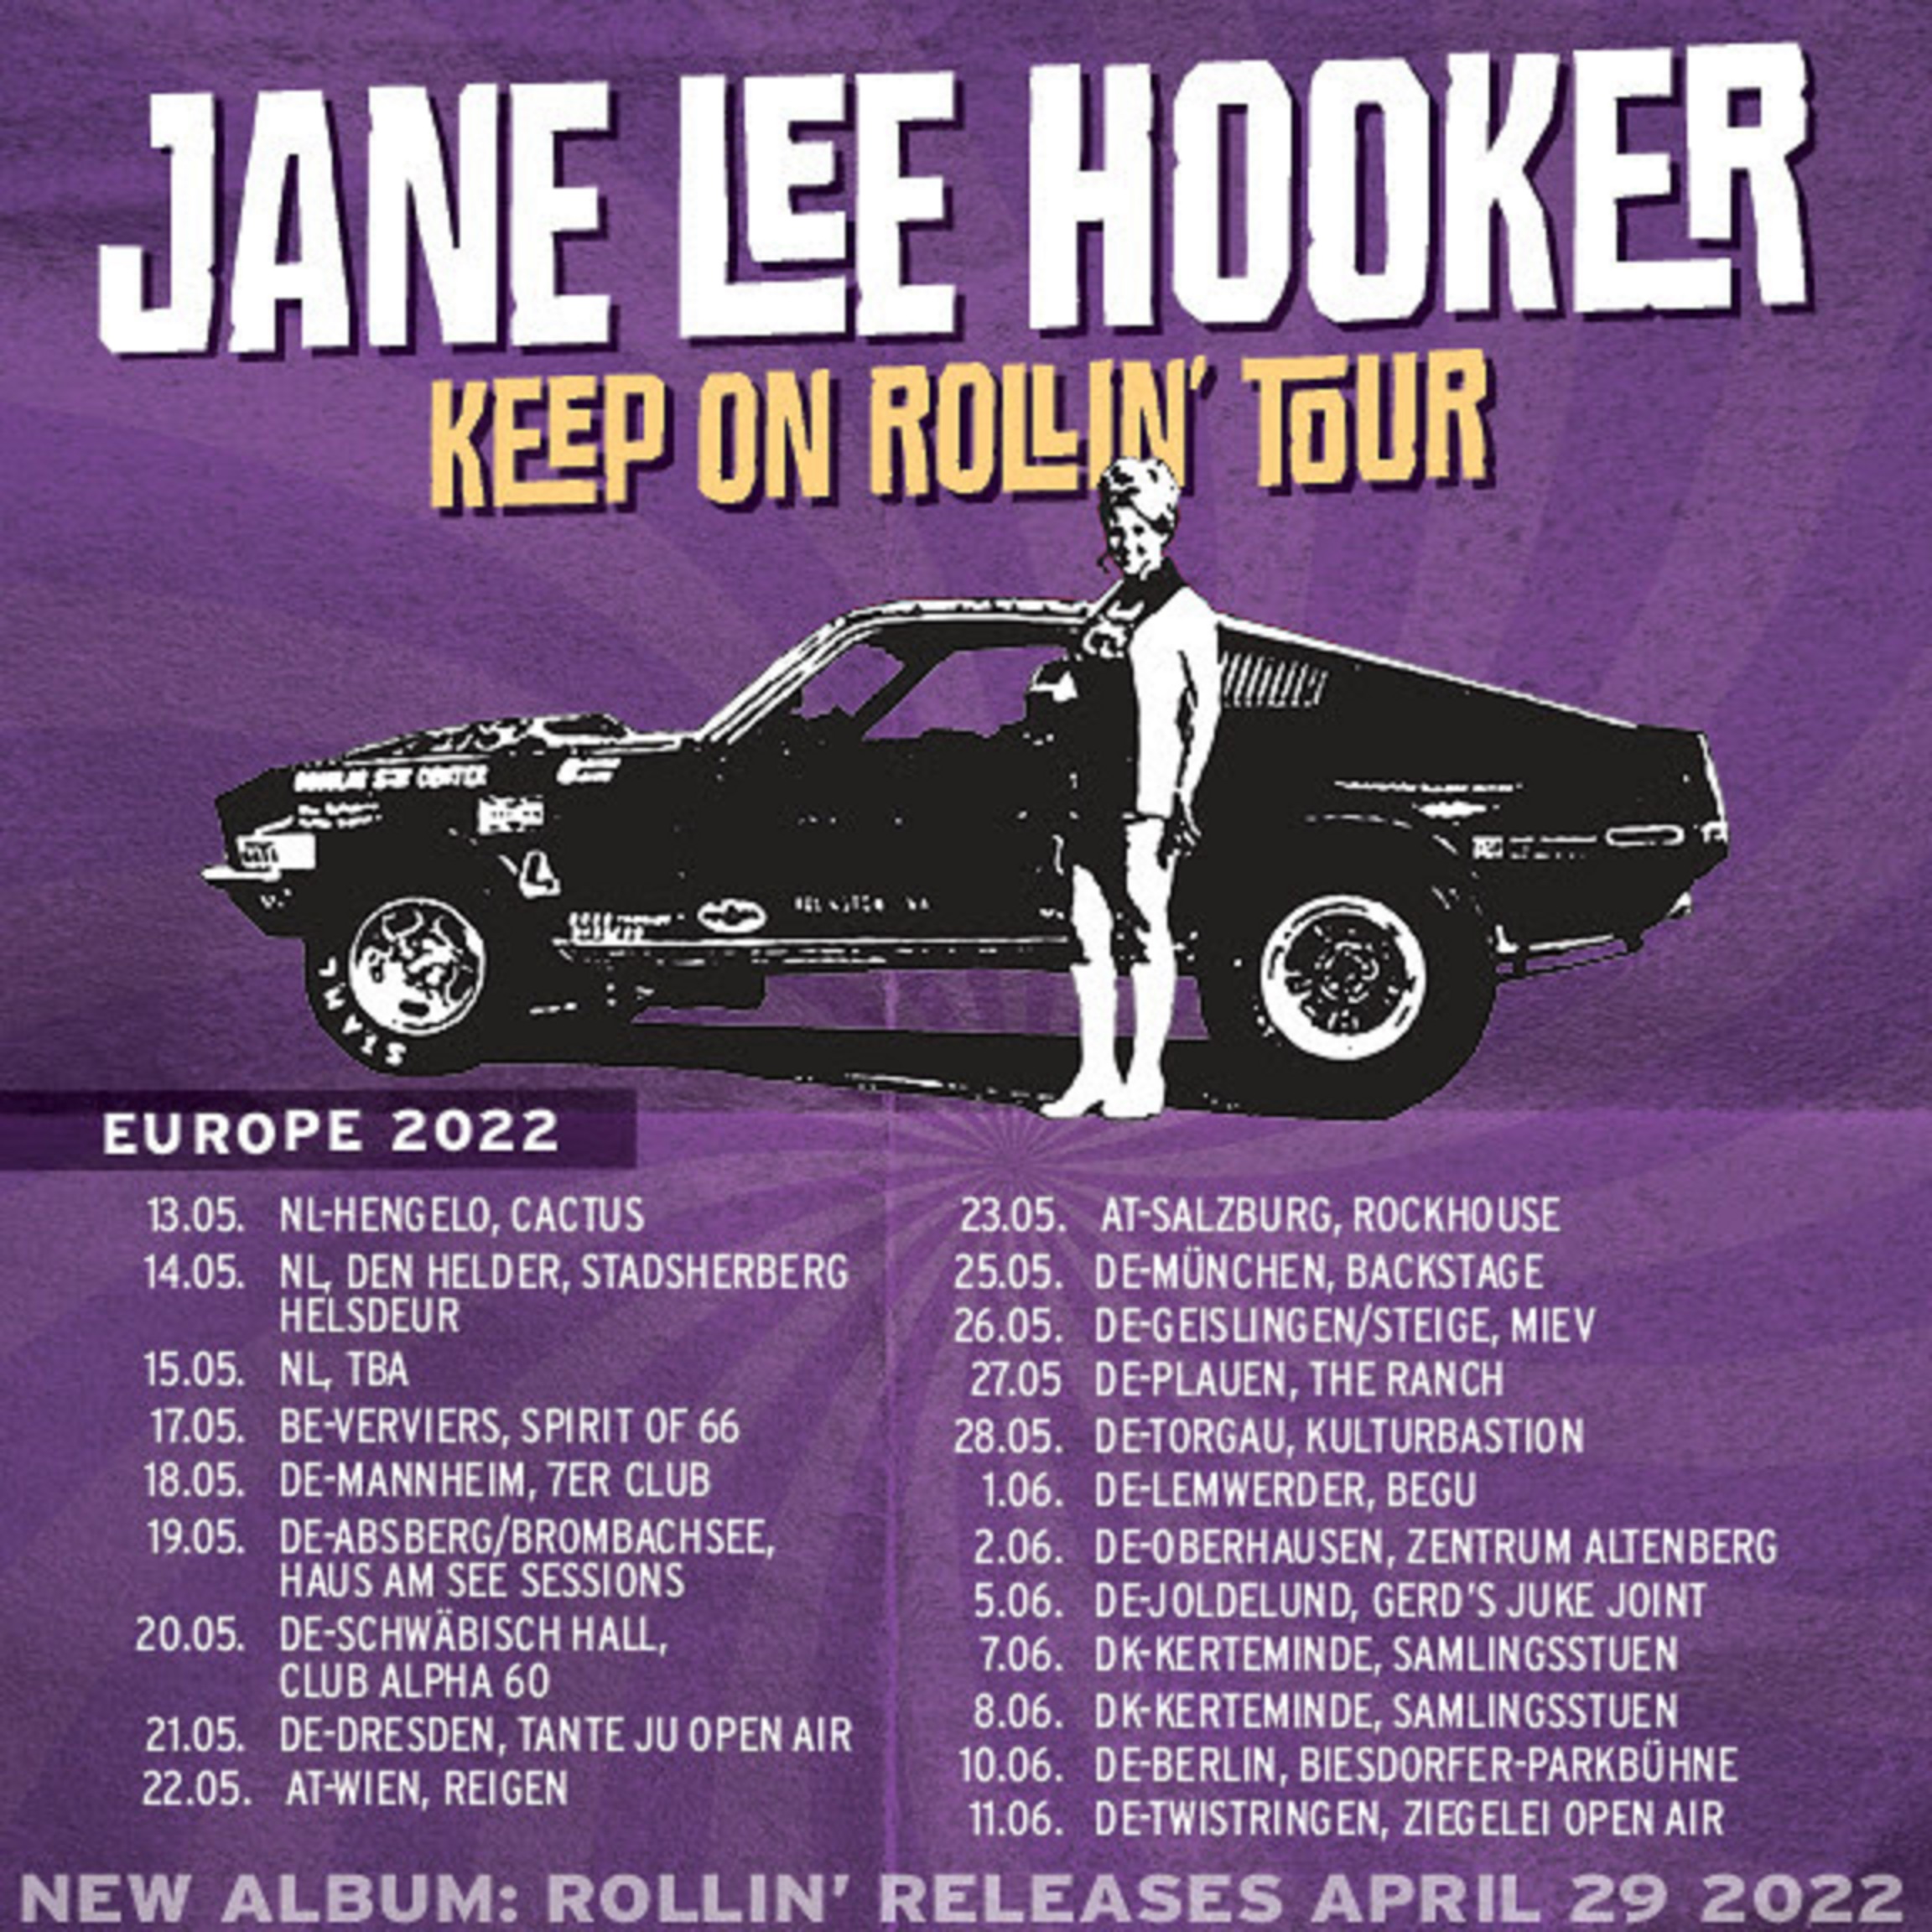 Jane Lee Hooker announce European tour dates for May and June